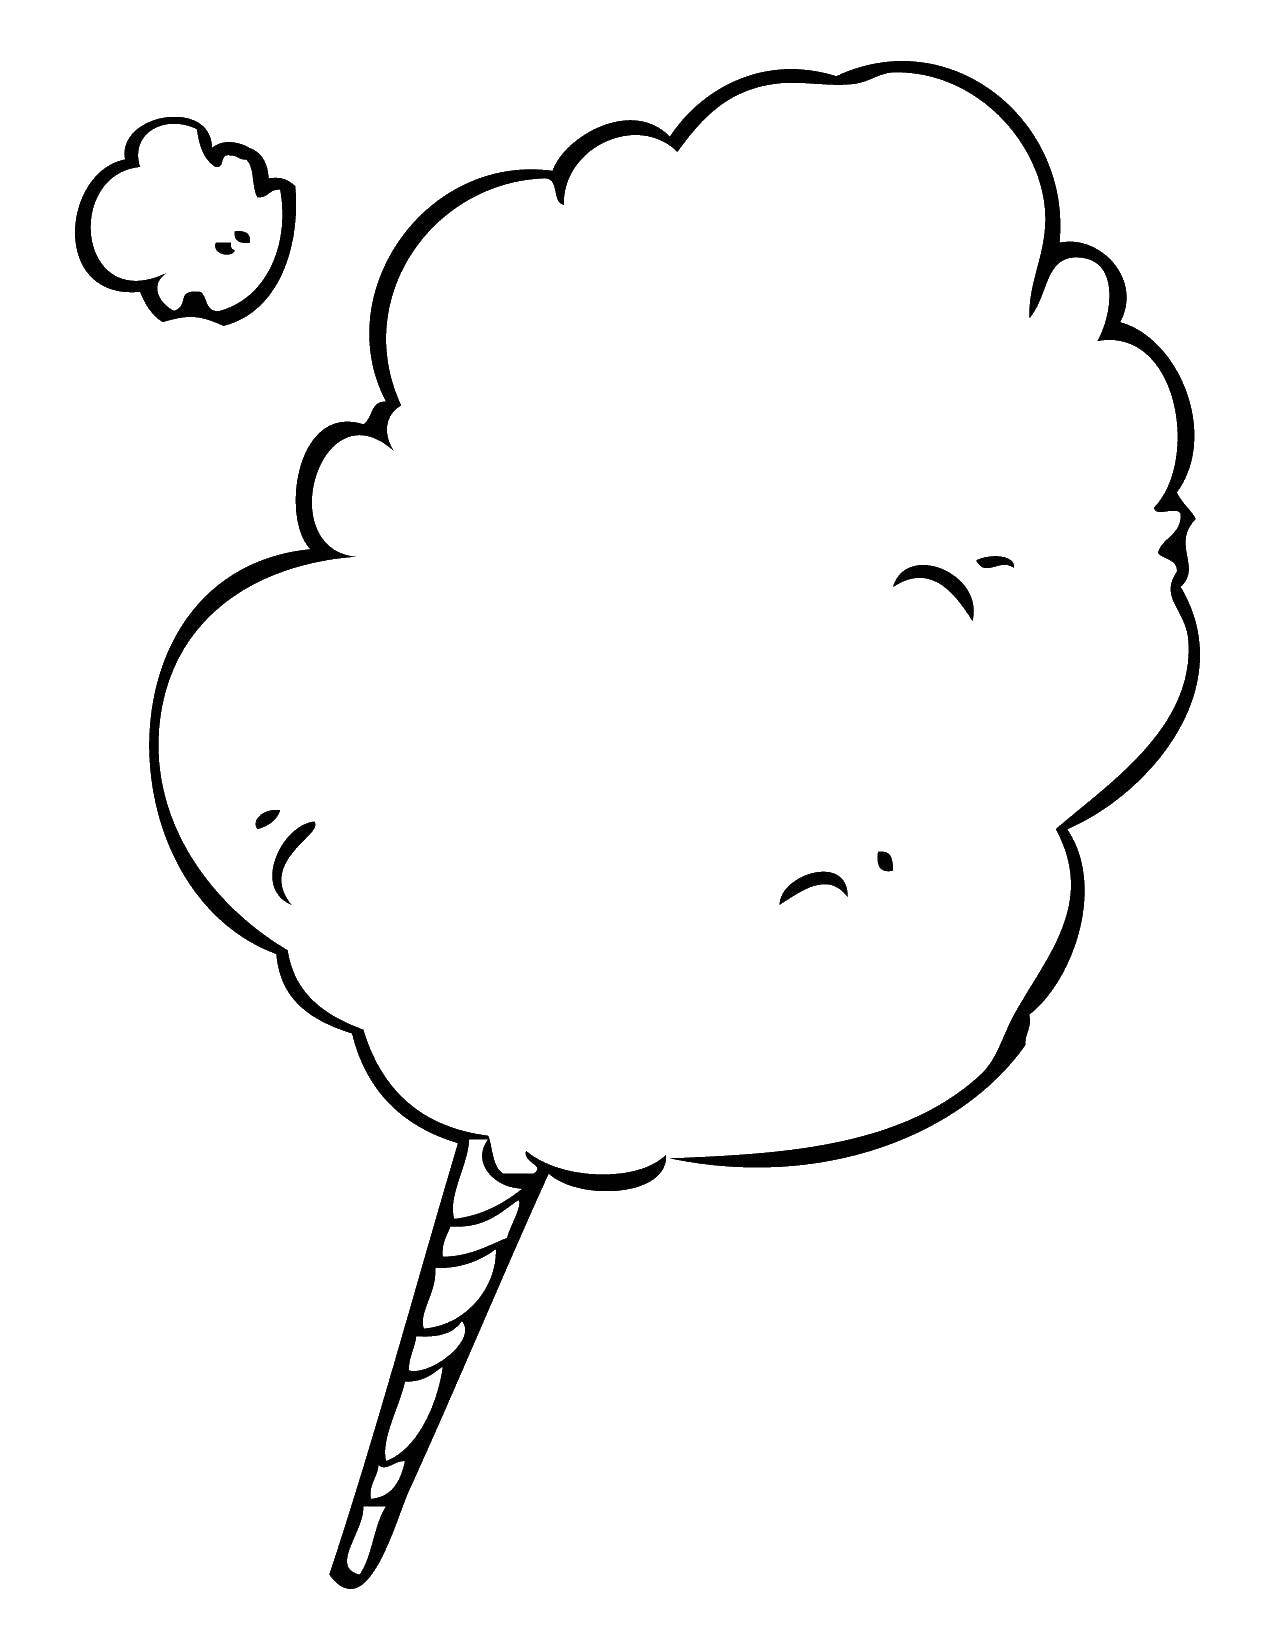 Coloring Cotton candy on a stick. Category Summer fun. Tags:  wool, wand.